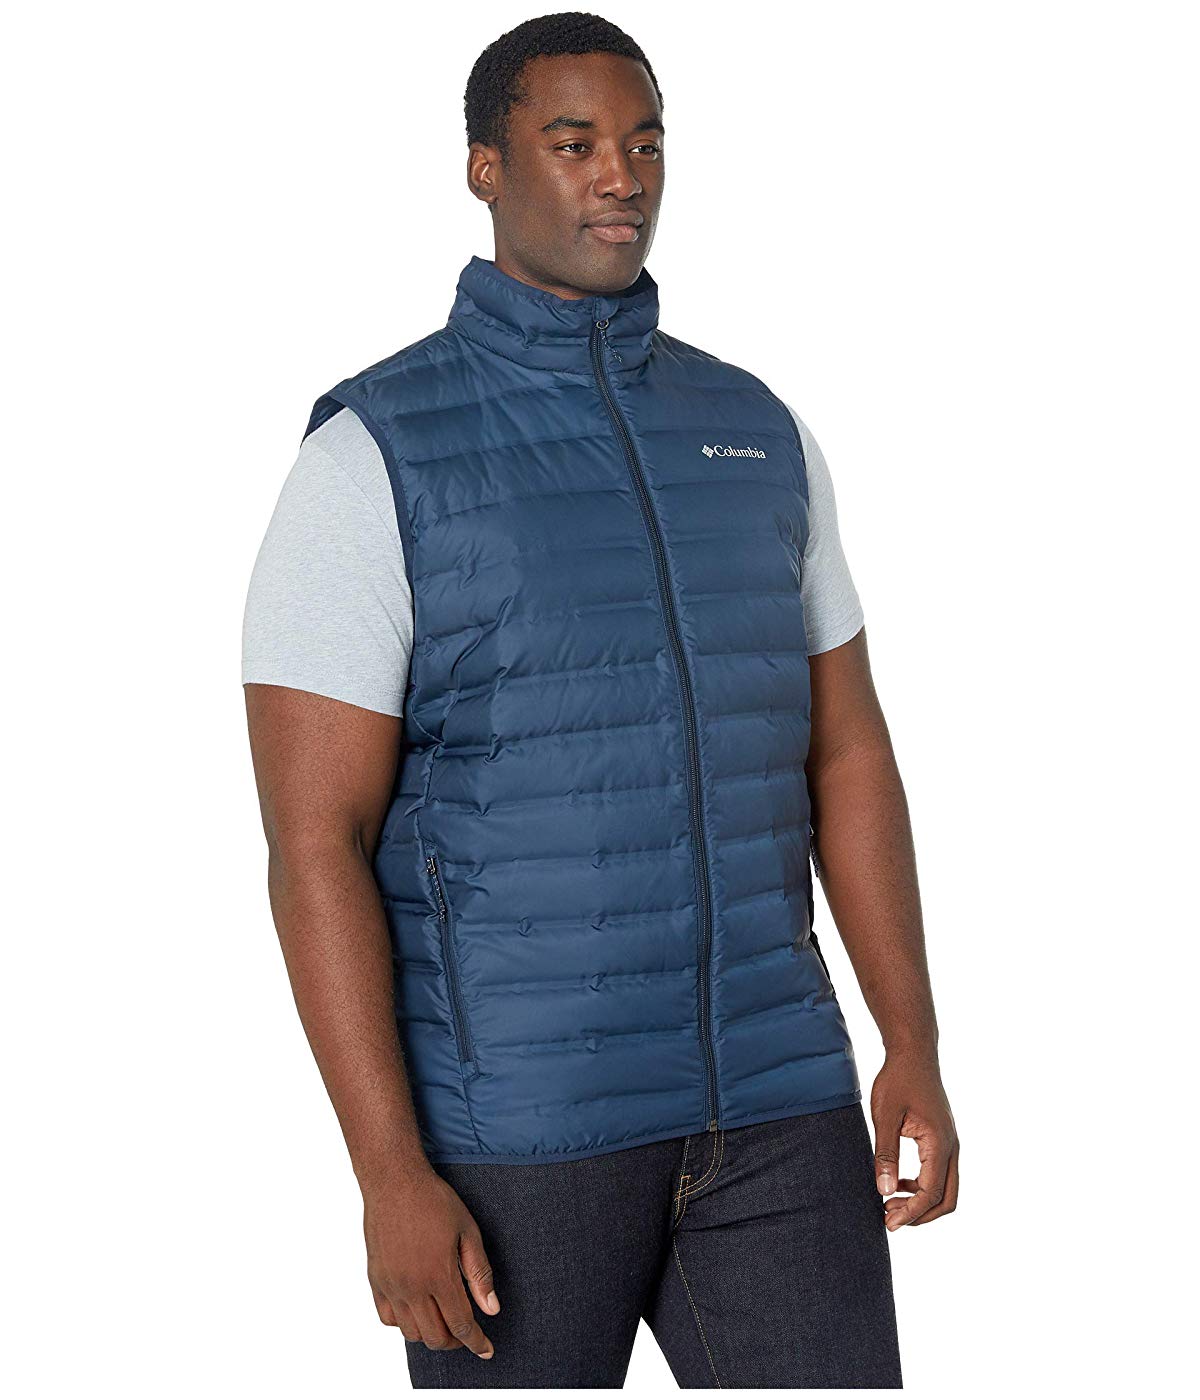 Columbia Big & Tall Lake 22 Down Vest Collegiate Navy - image 3 of 4